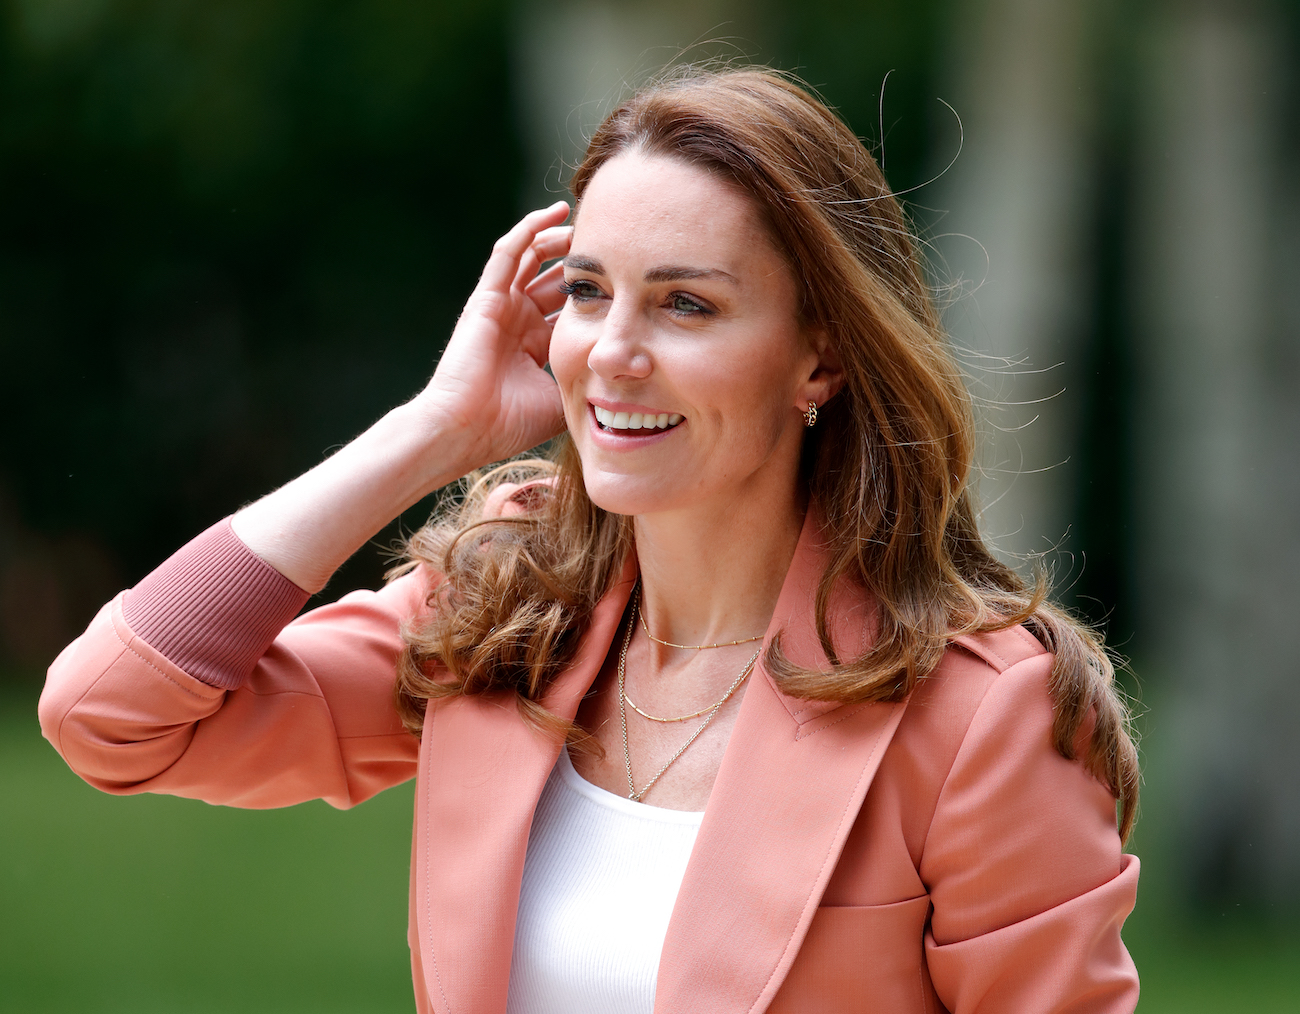 Kate Middleton smiling while wearing a salmon-colored jacket